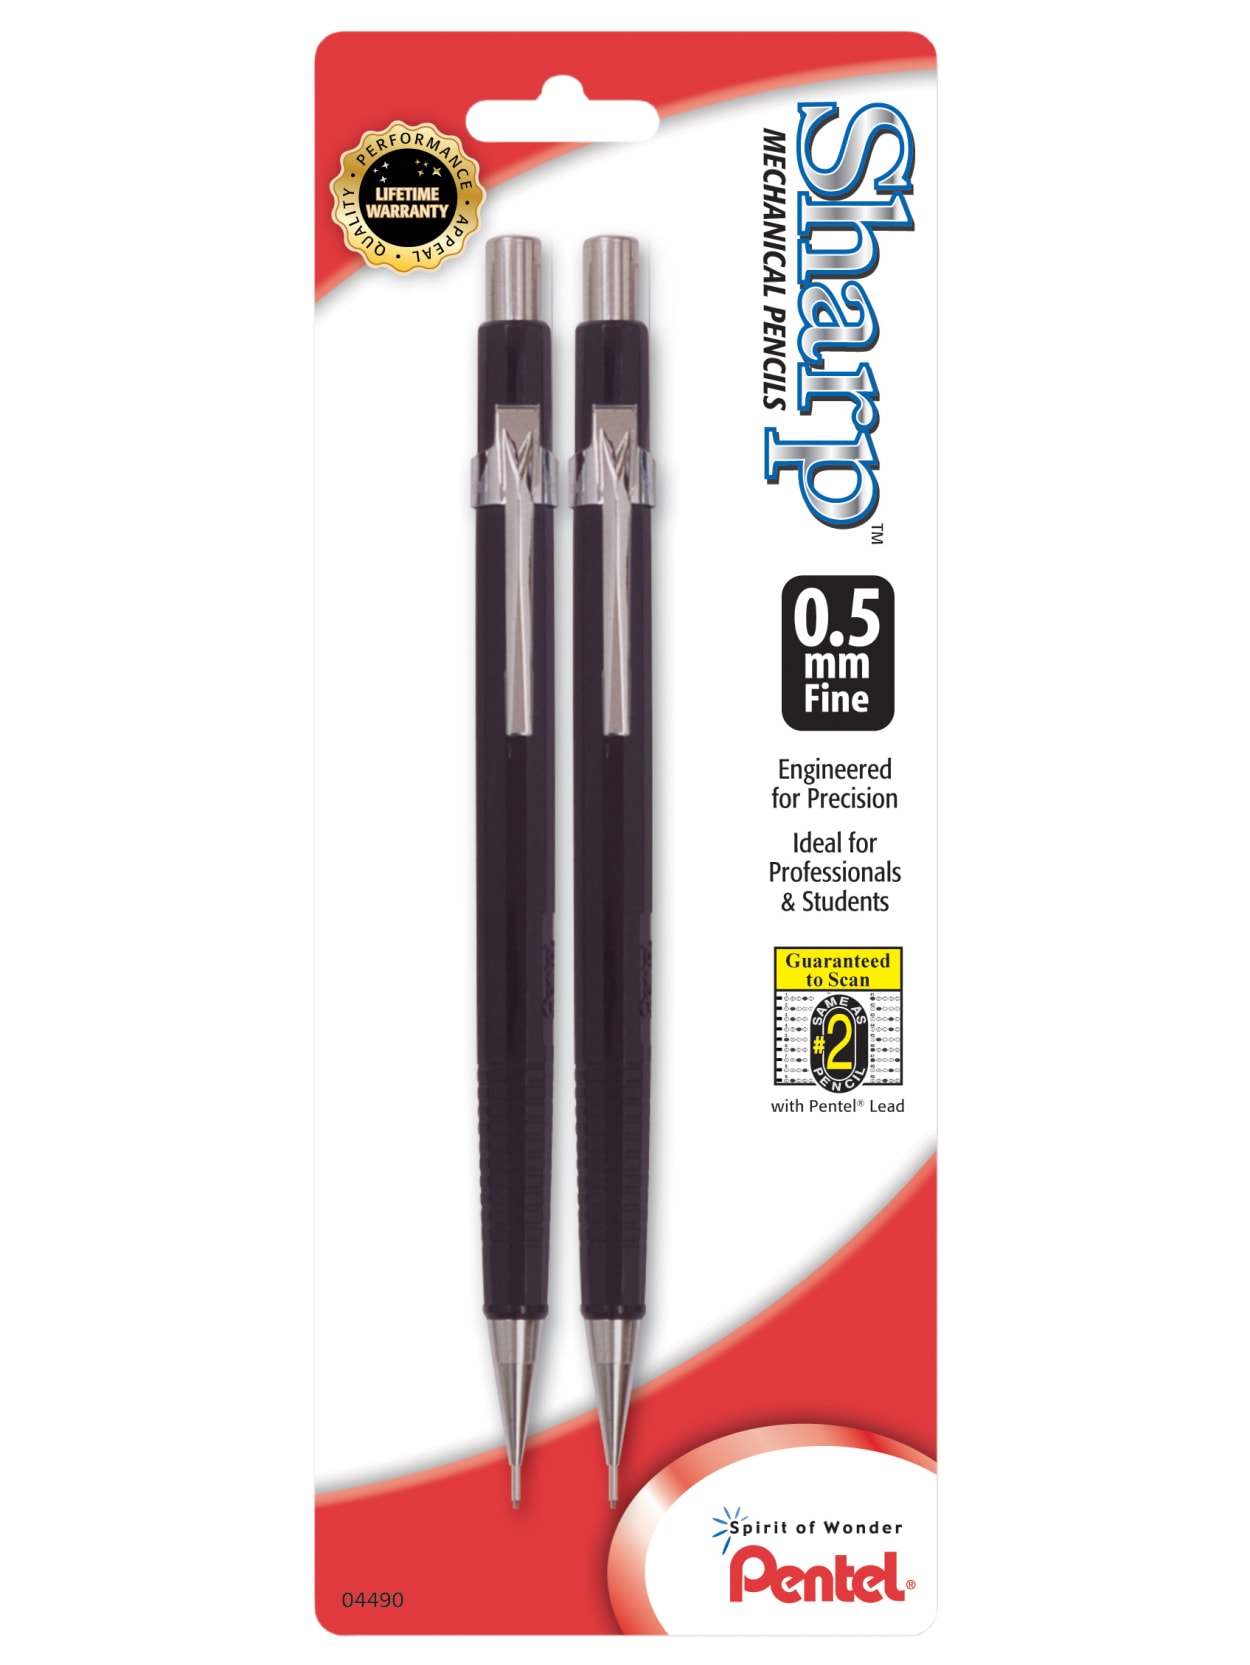 50 pack of mechanical pencils